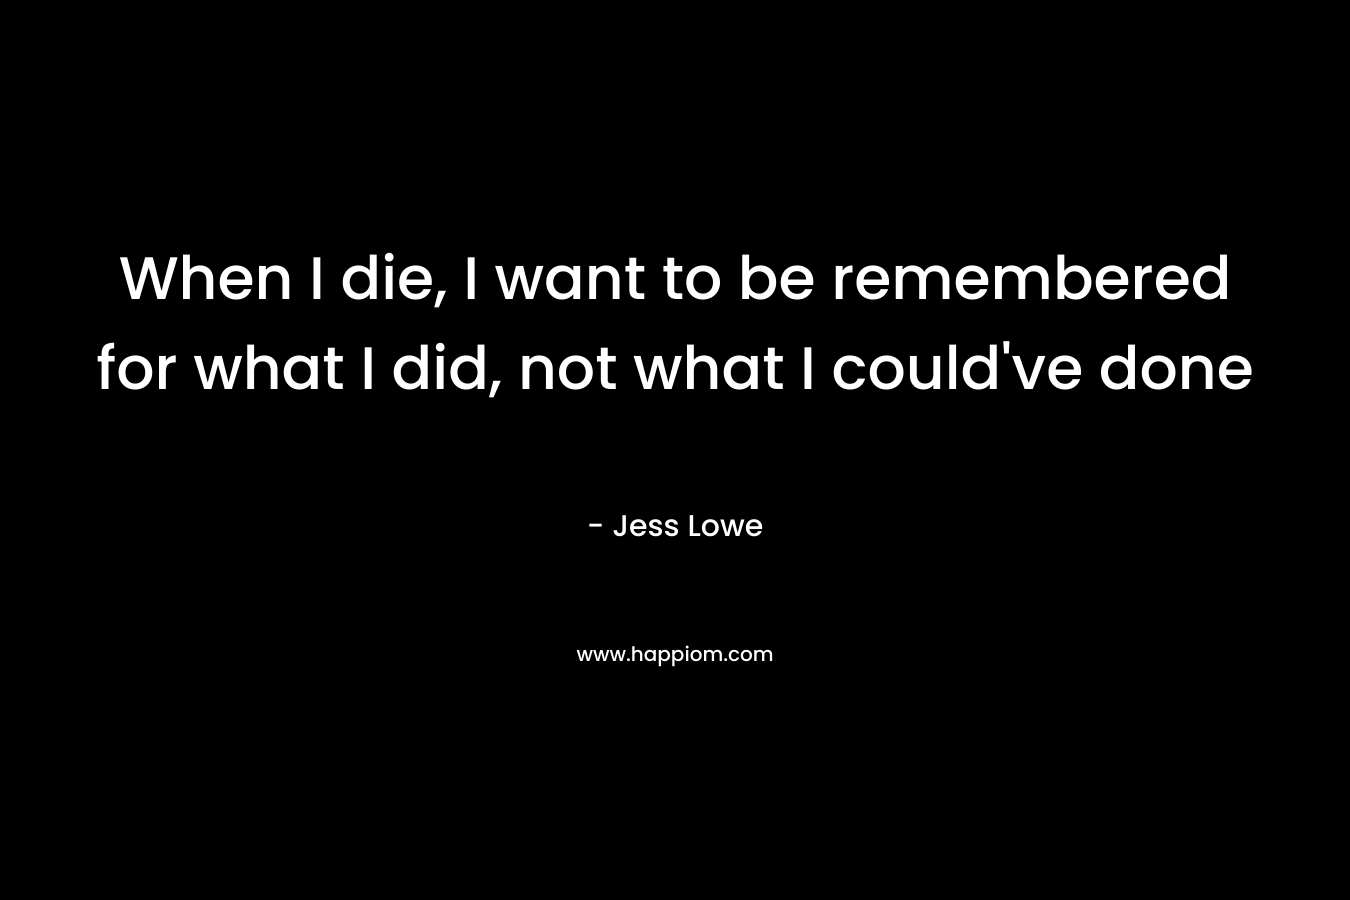 When I die, I want to be remembered for what I did, not what I could've done